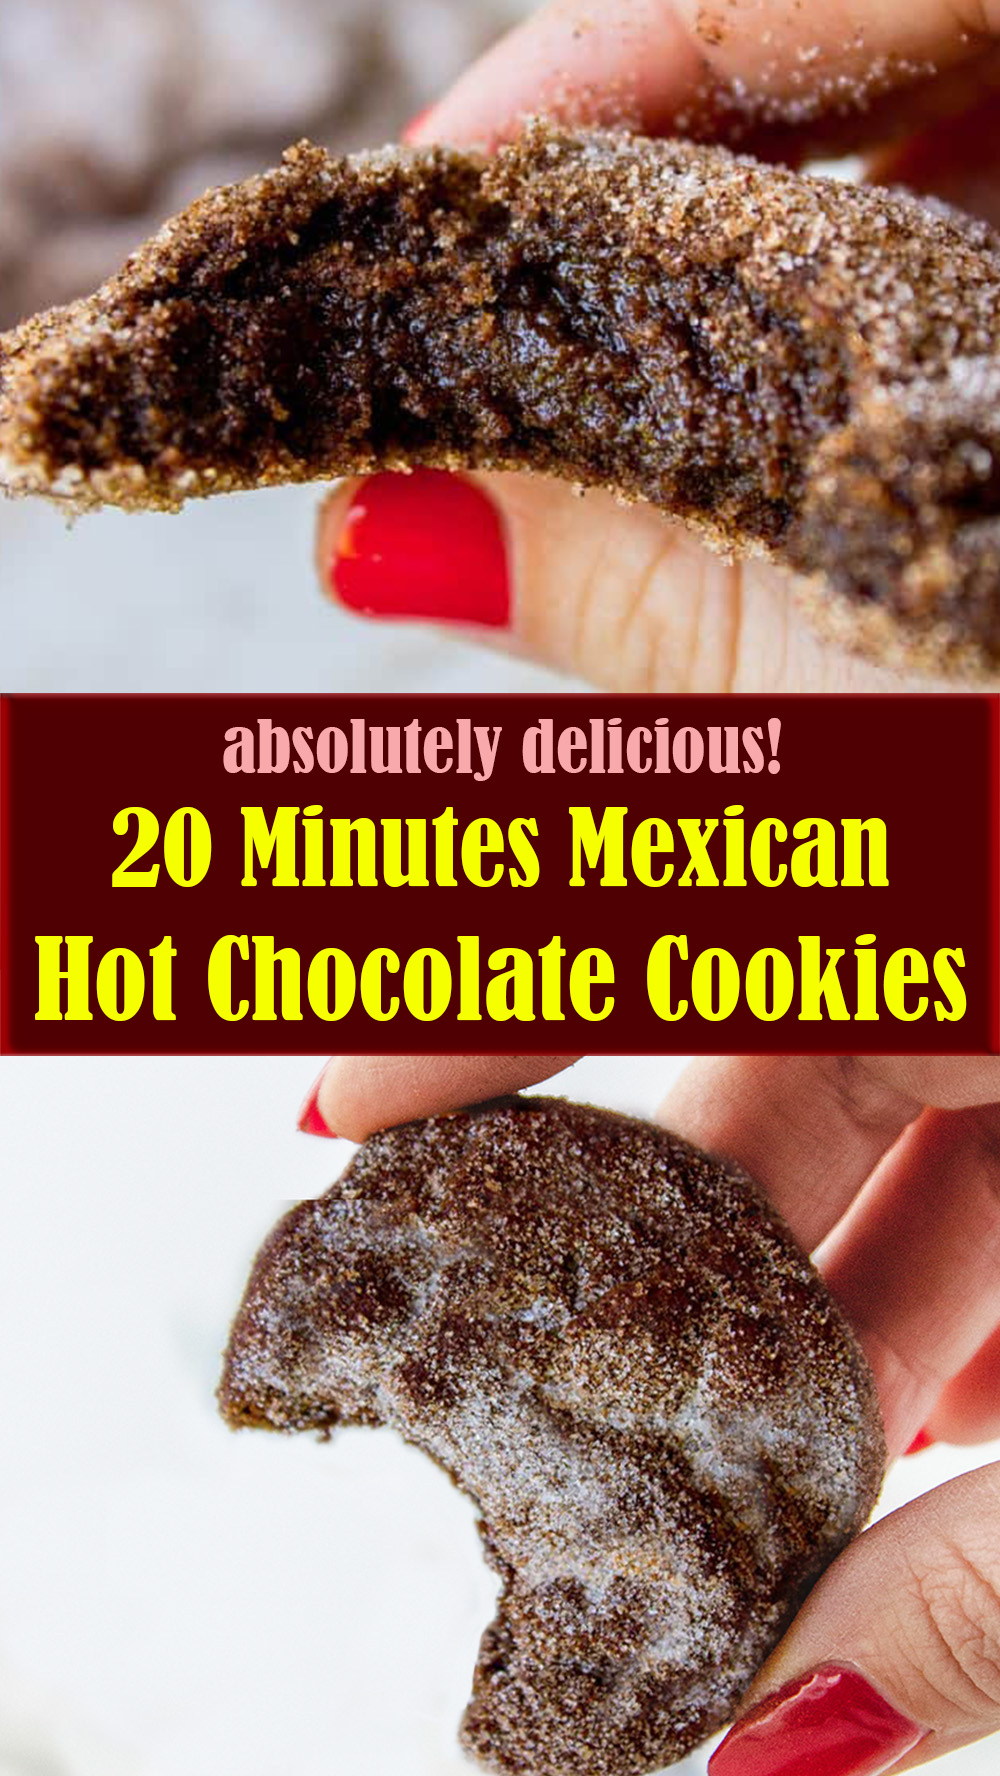 20 Minutes Mexican Hot Chocolate Cookies